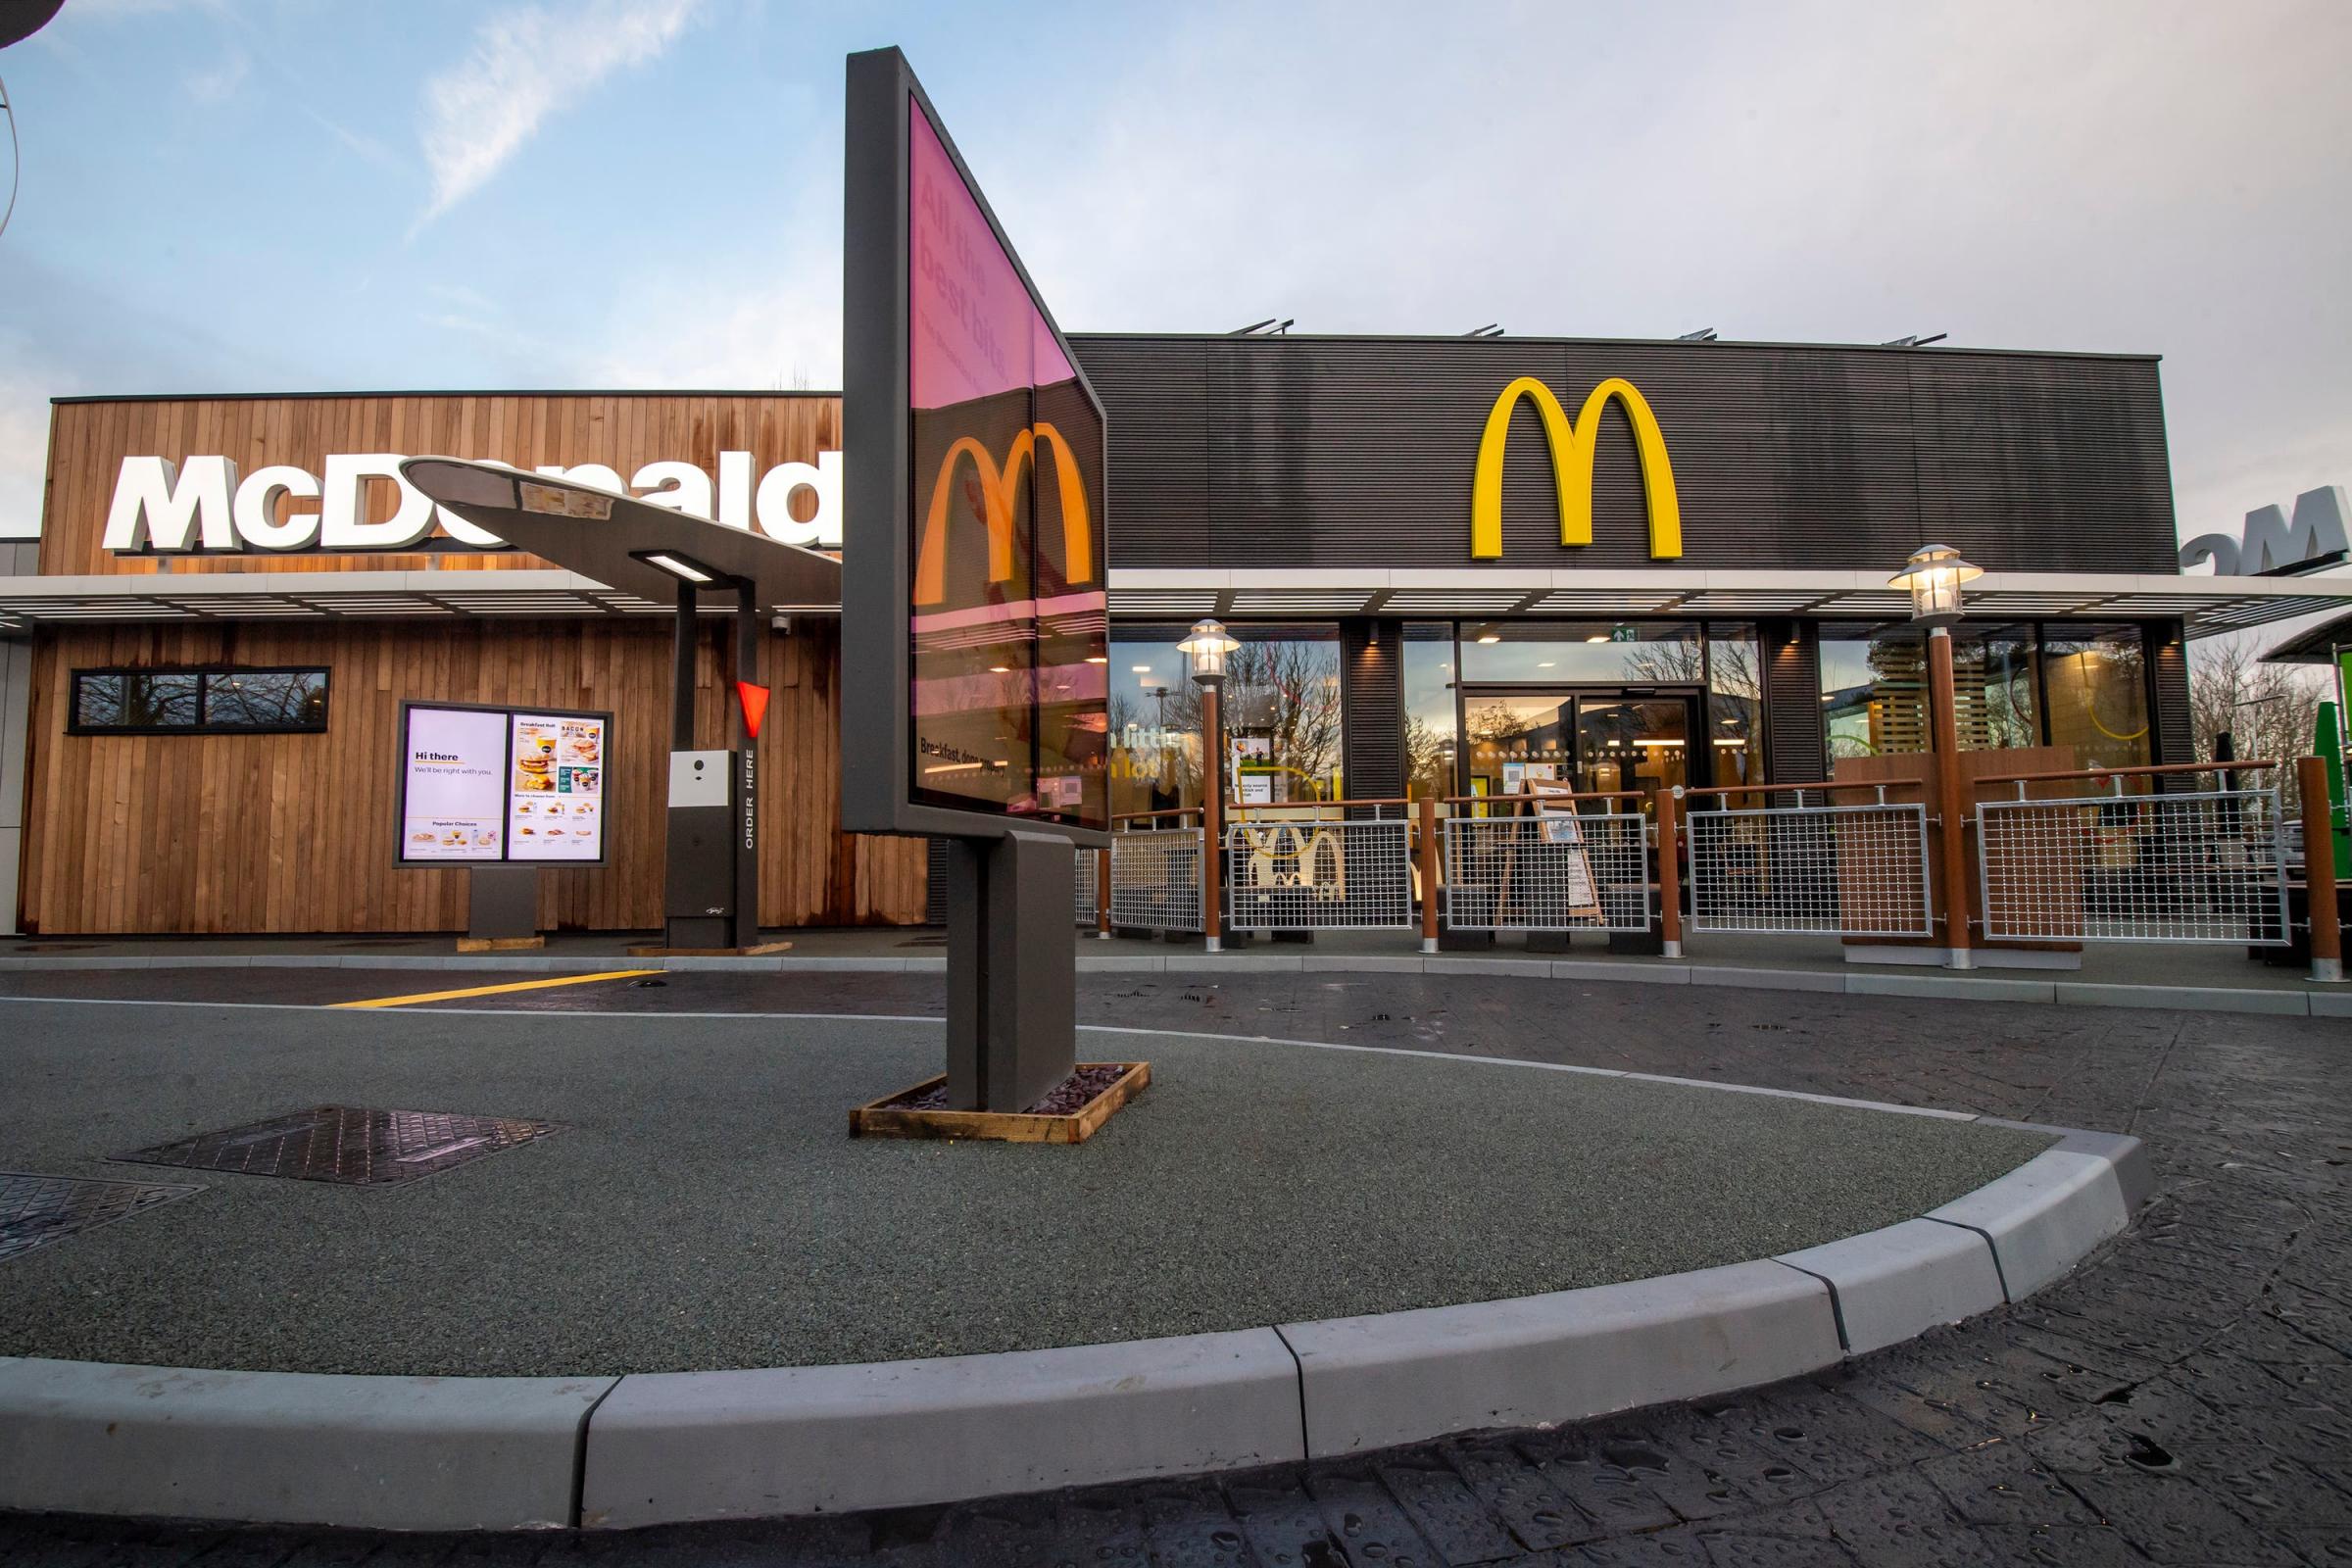 Hygiene ratings for every McDonald's in Dumbarton